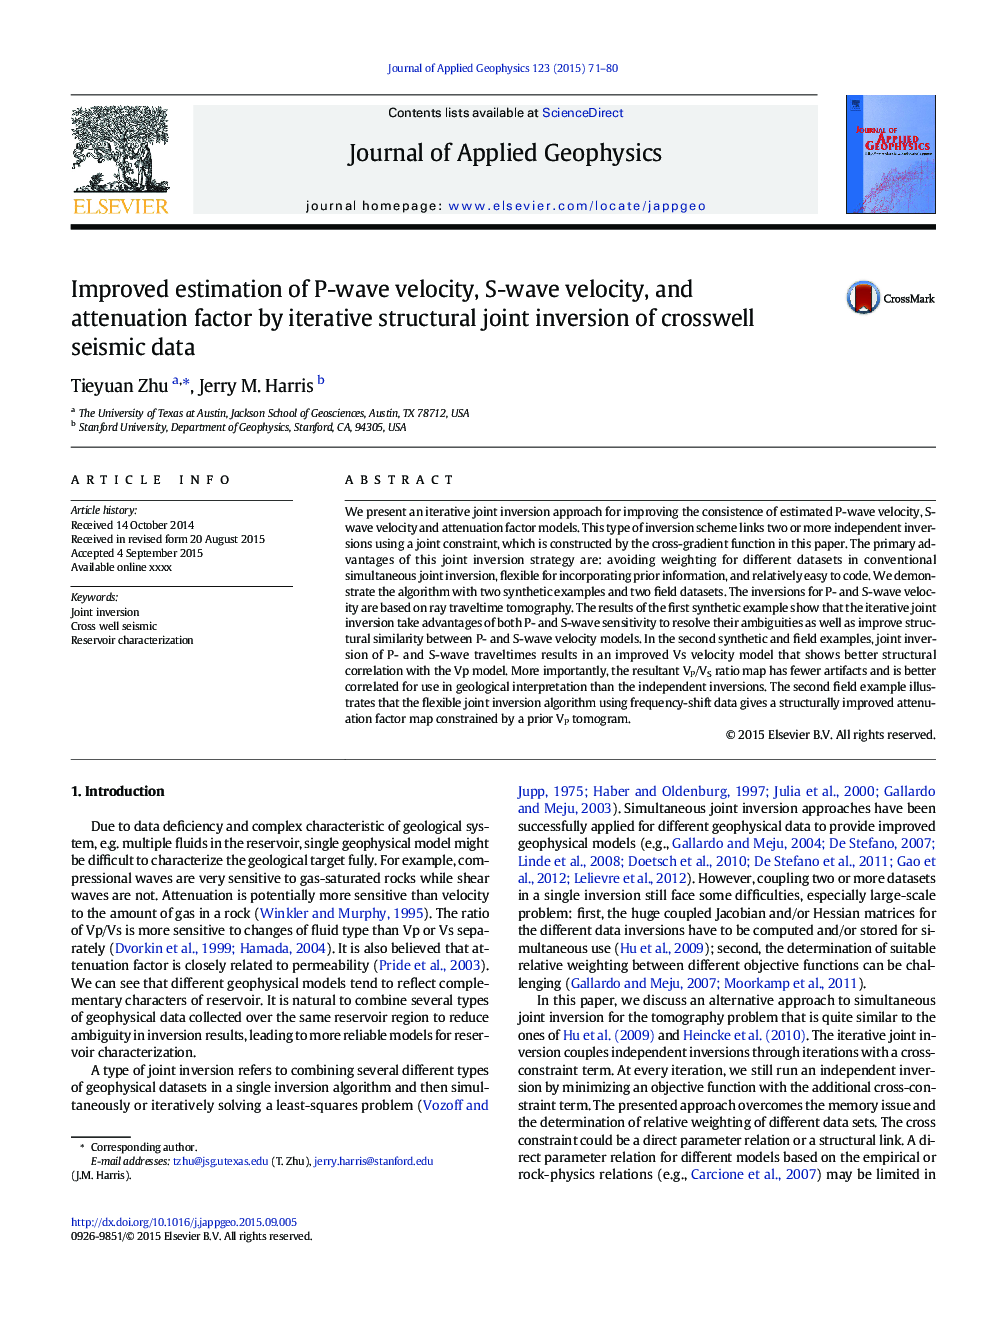 Improved estimation of P-wave velocity, S-wave velocity, and attenuation factor by iterative structural joint inversion of crosswell seismic data